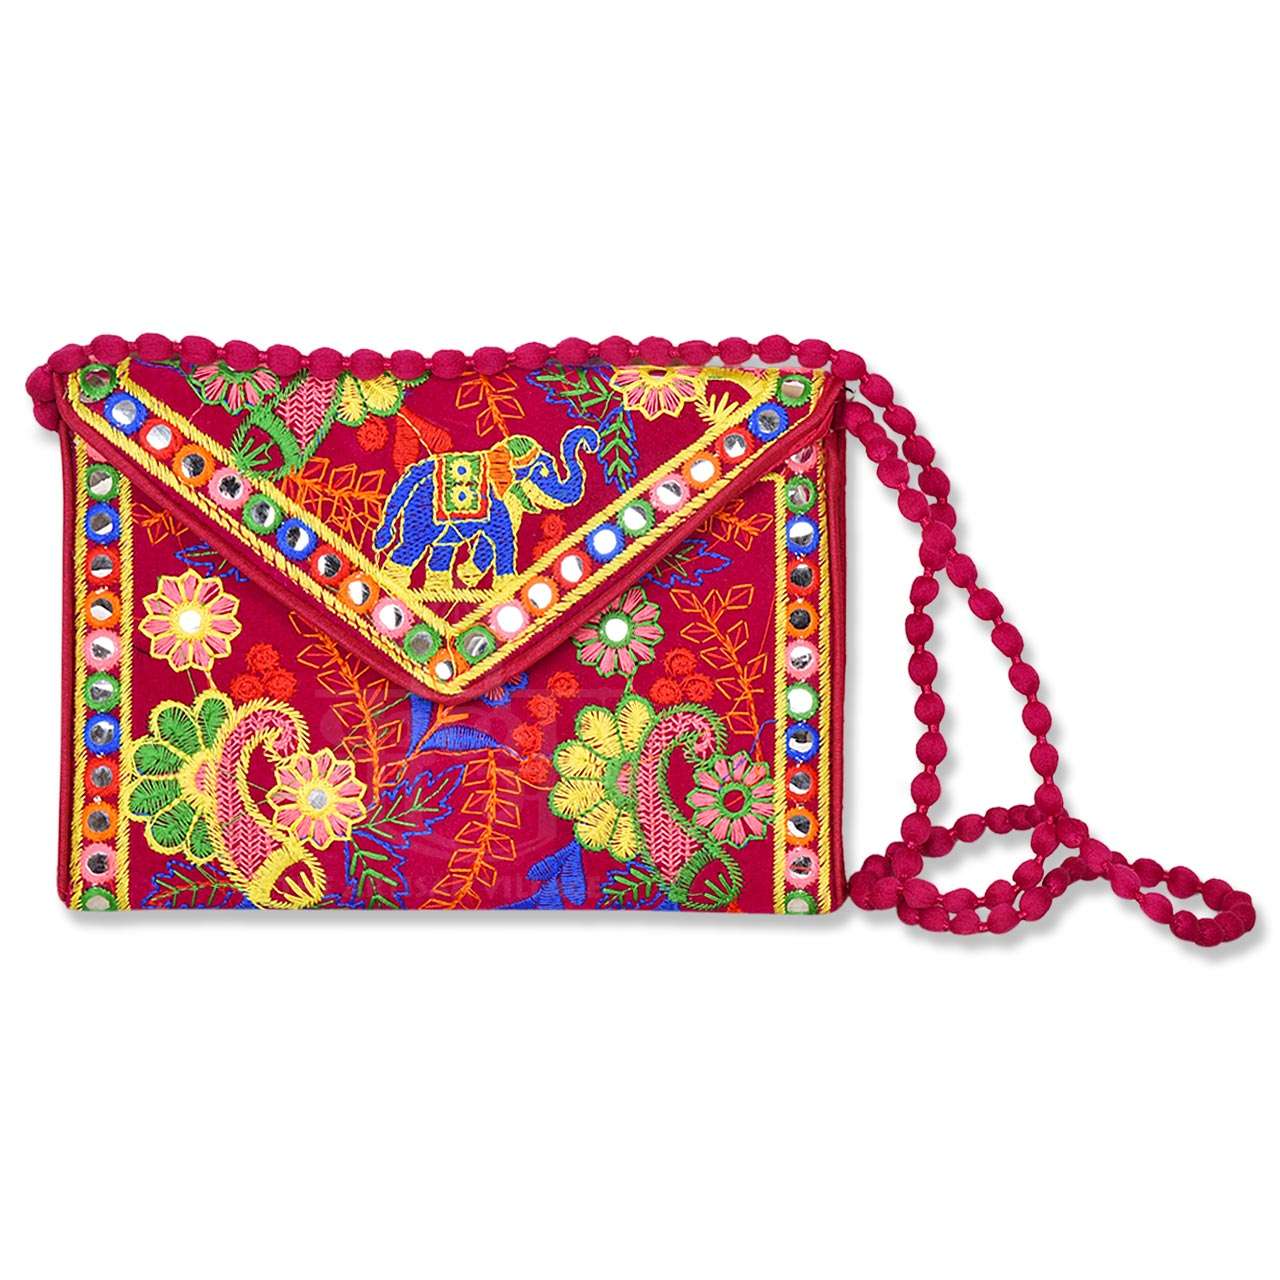 Handcrafted Bag Rajasthani Pink Hand Tote Bag Purse #HB39 – Zenia Creations